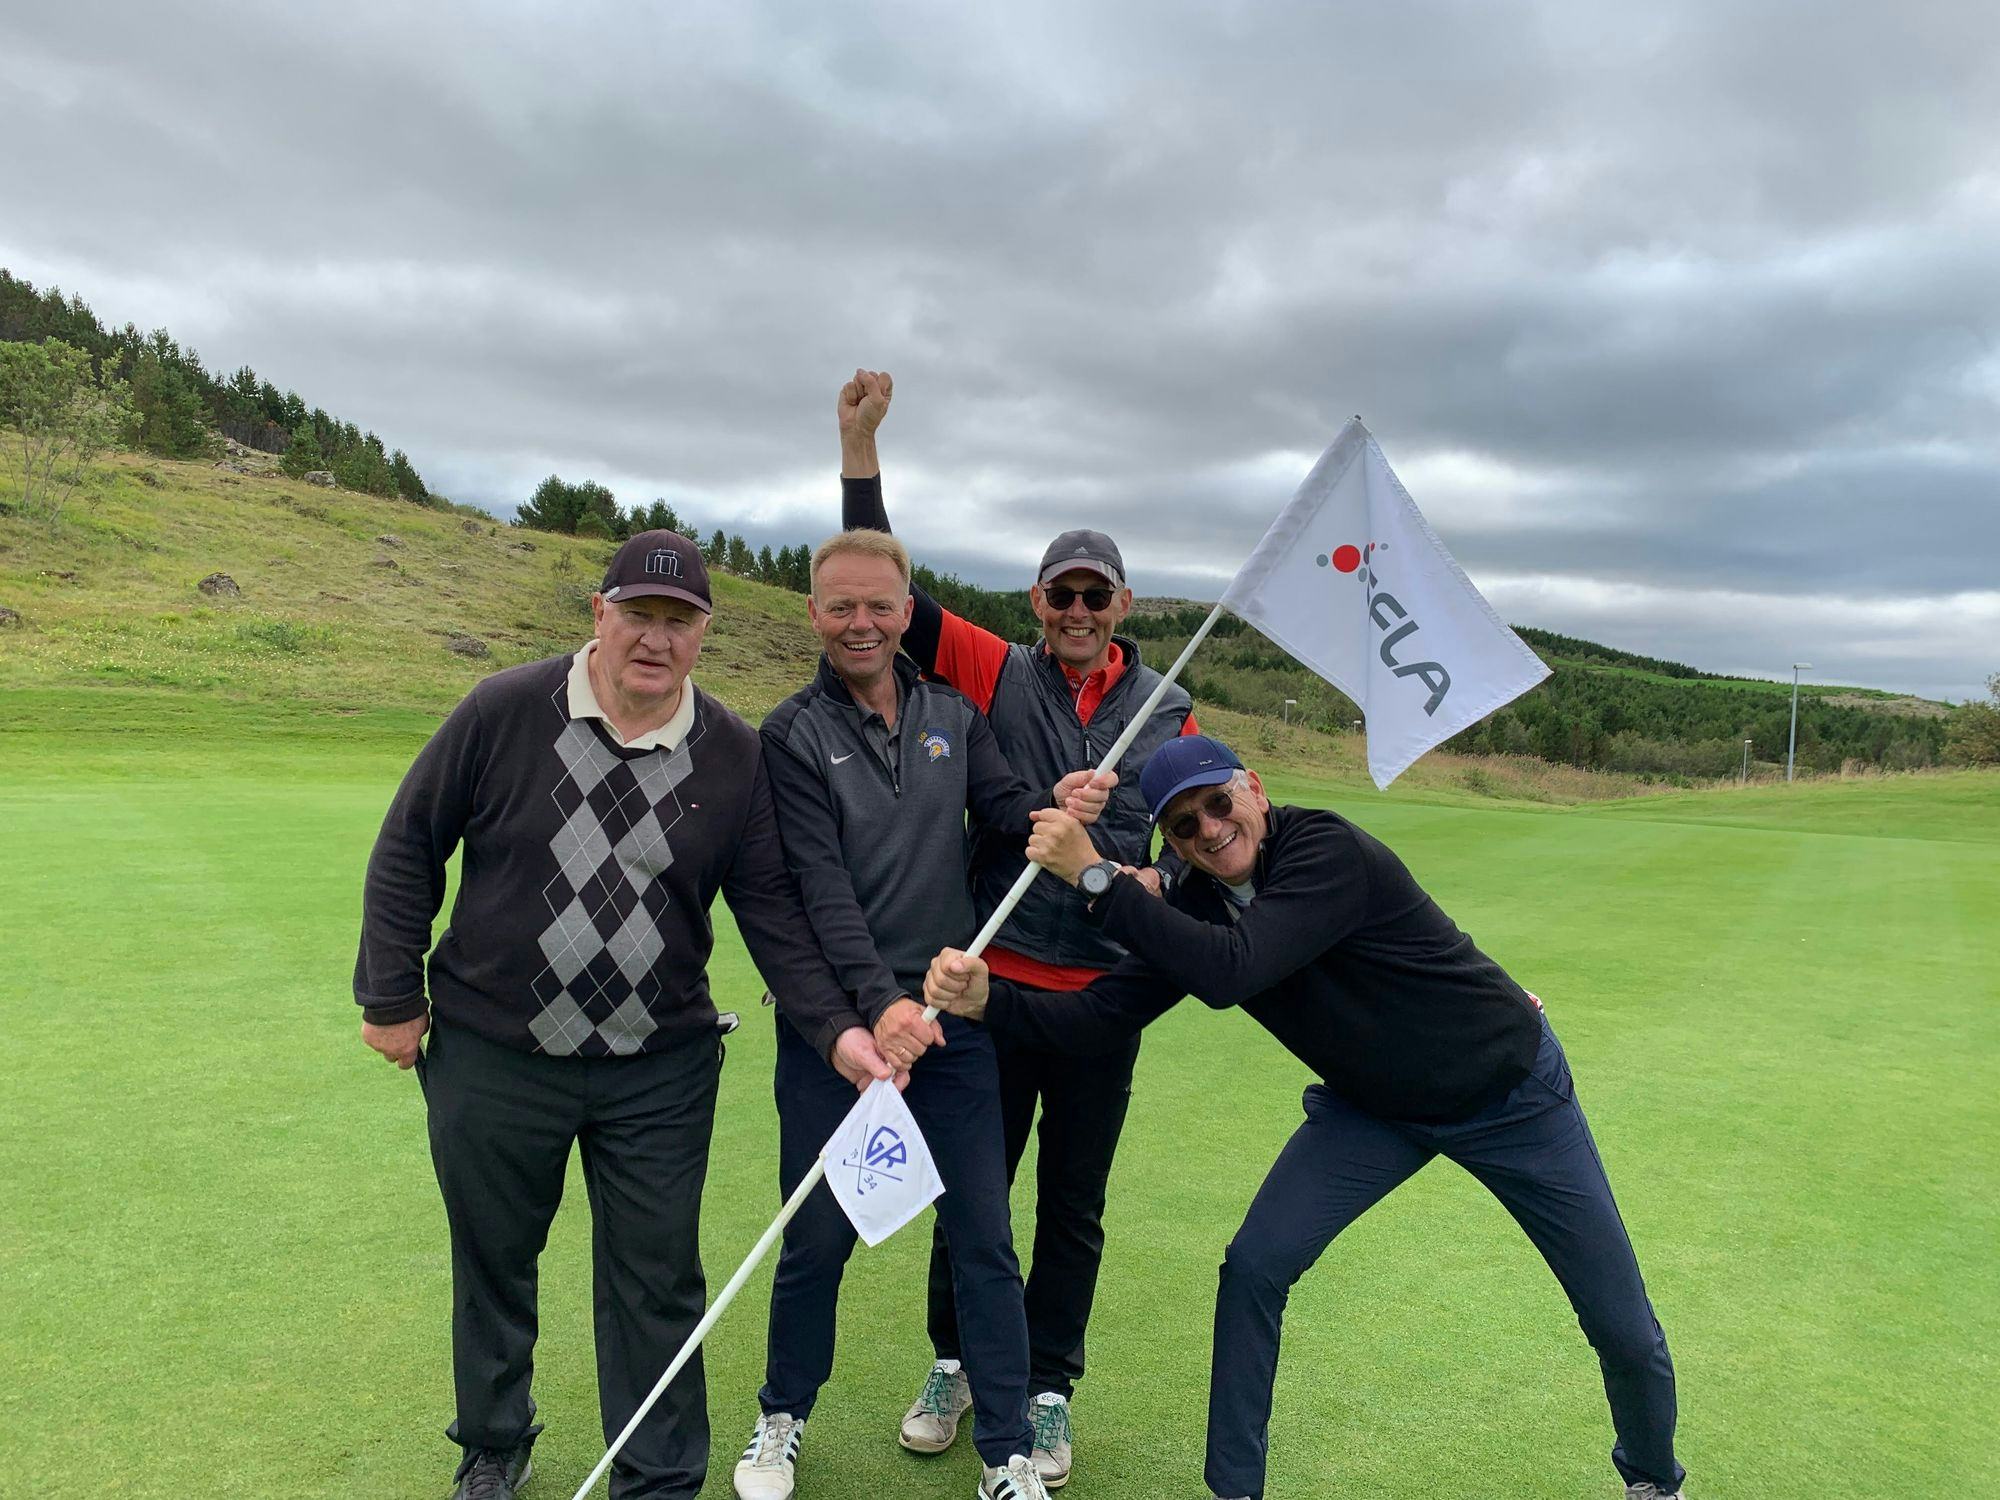 Four men posing joyfully on a golf course with one of them holding a flagstick